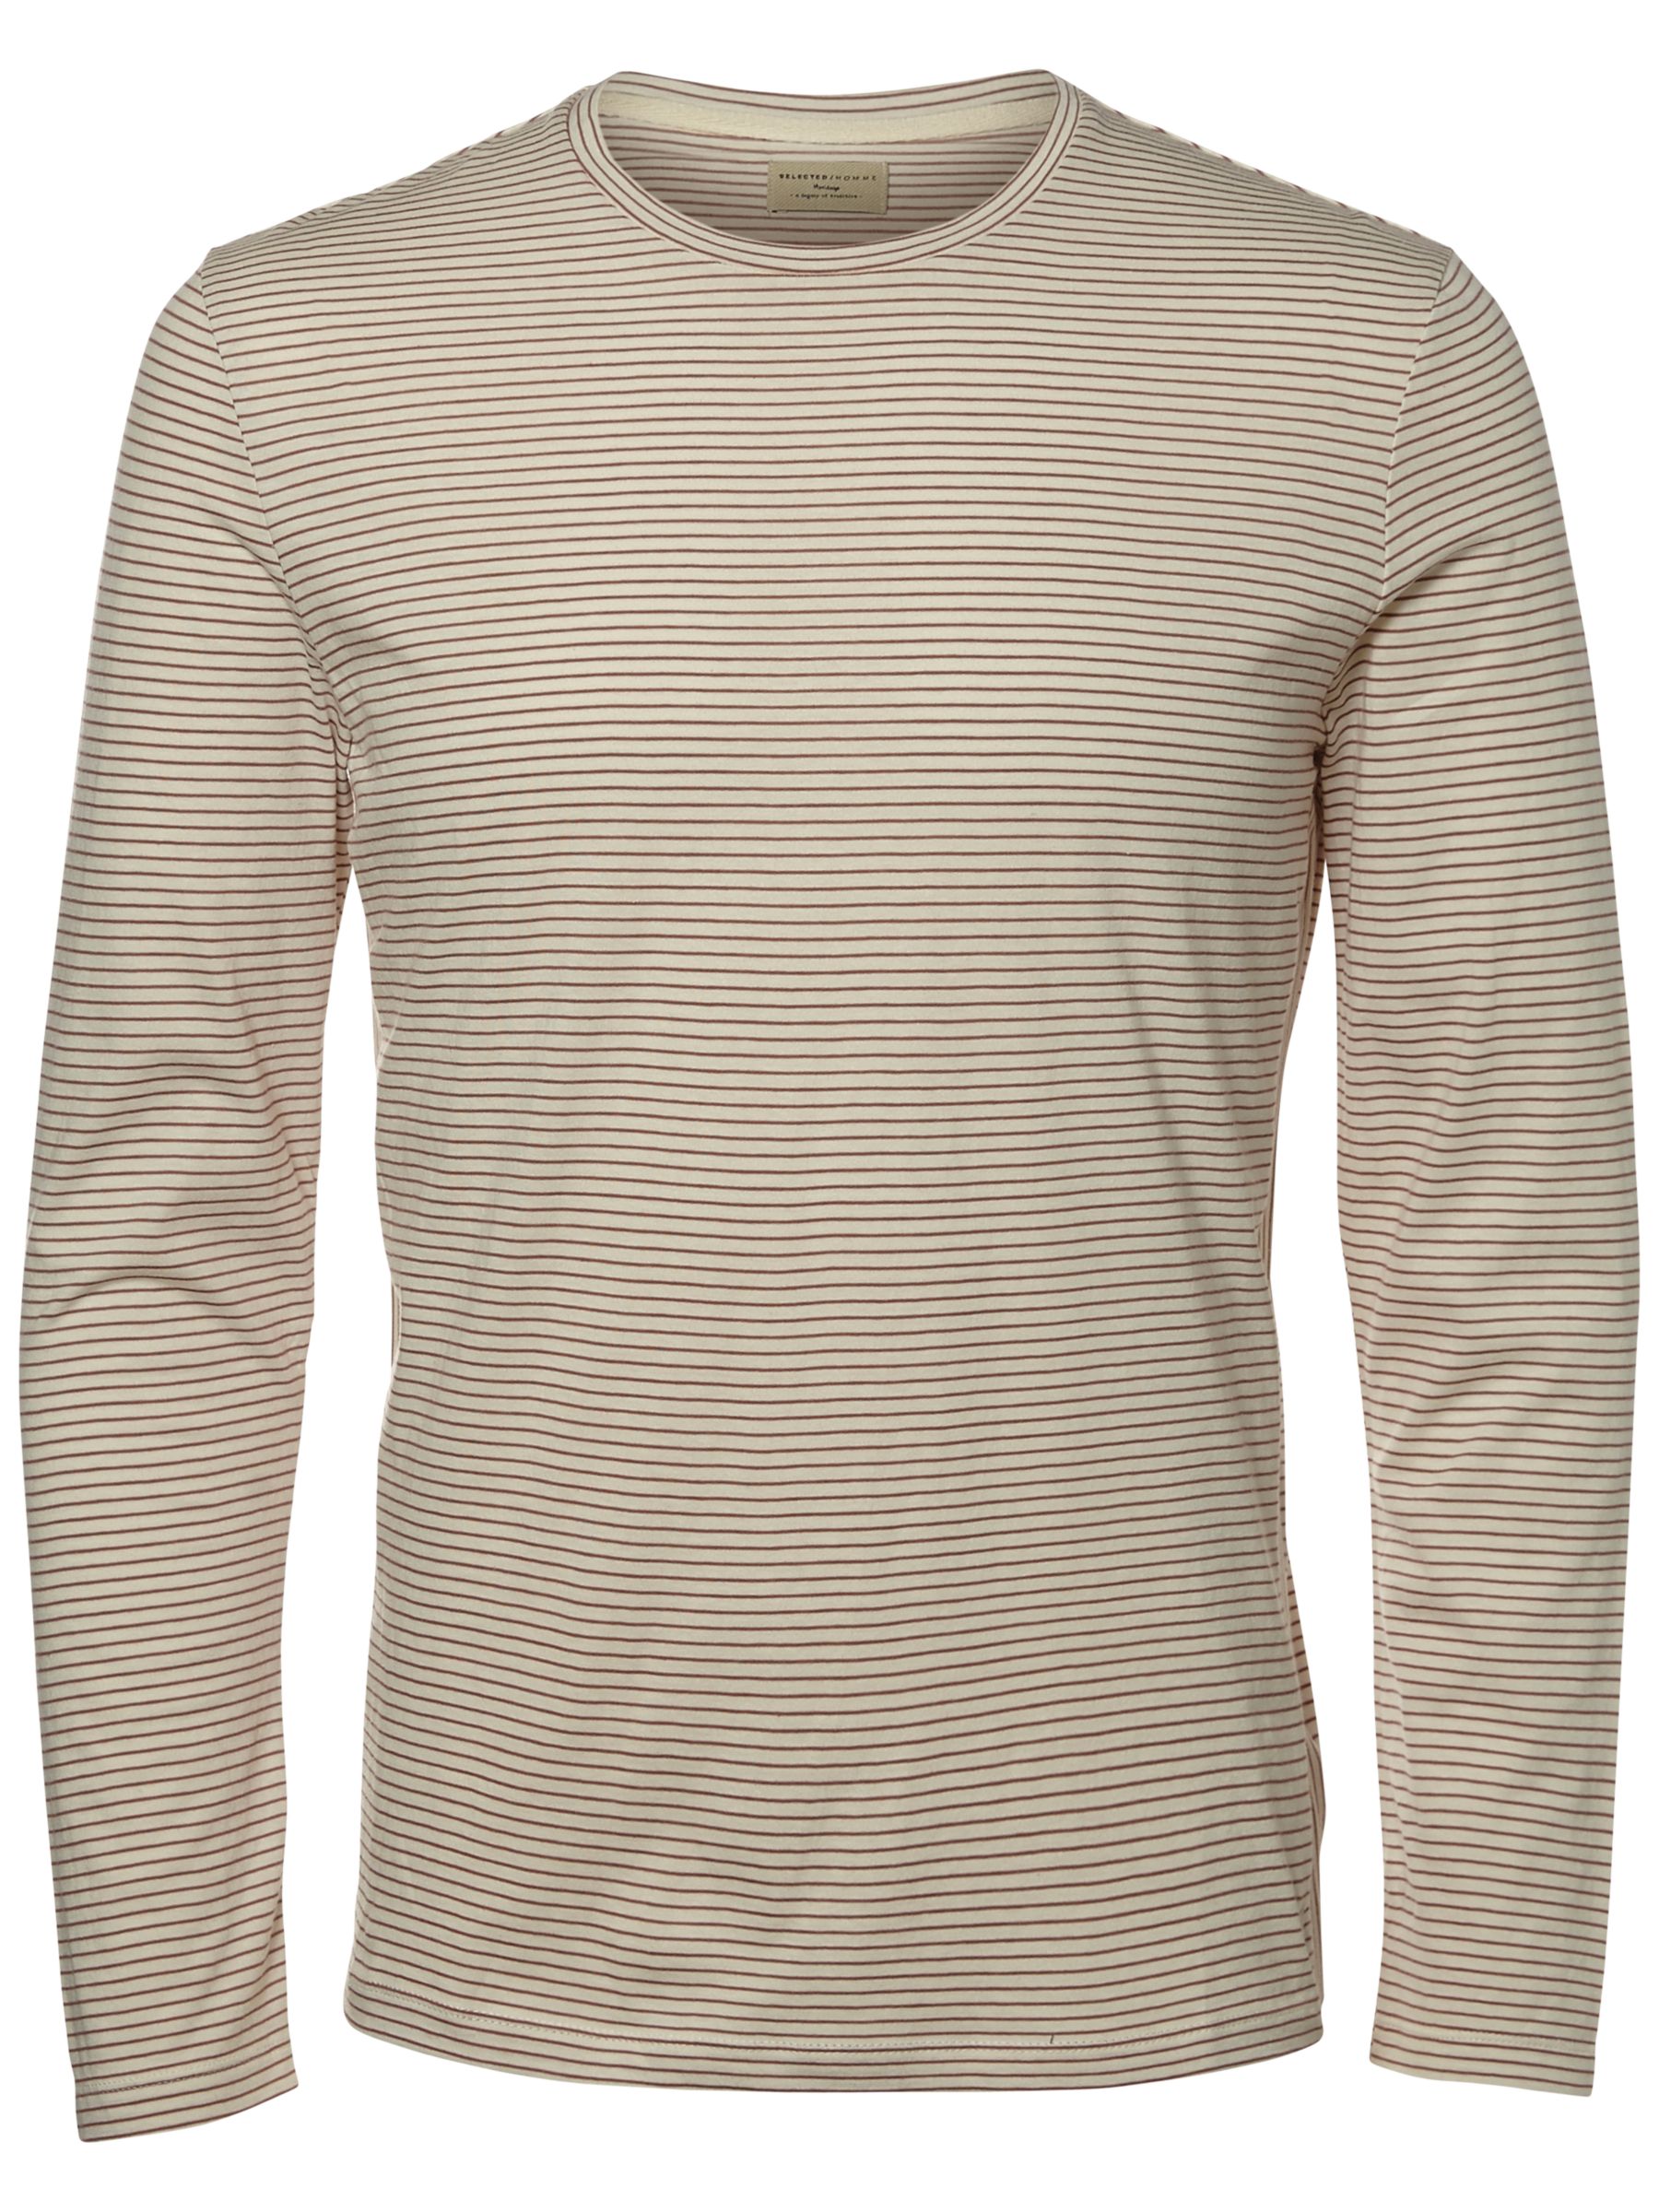 Selected Homme Heritage Long Sleeve Striped T-Shirt